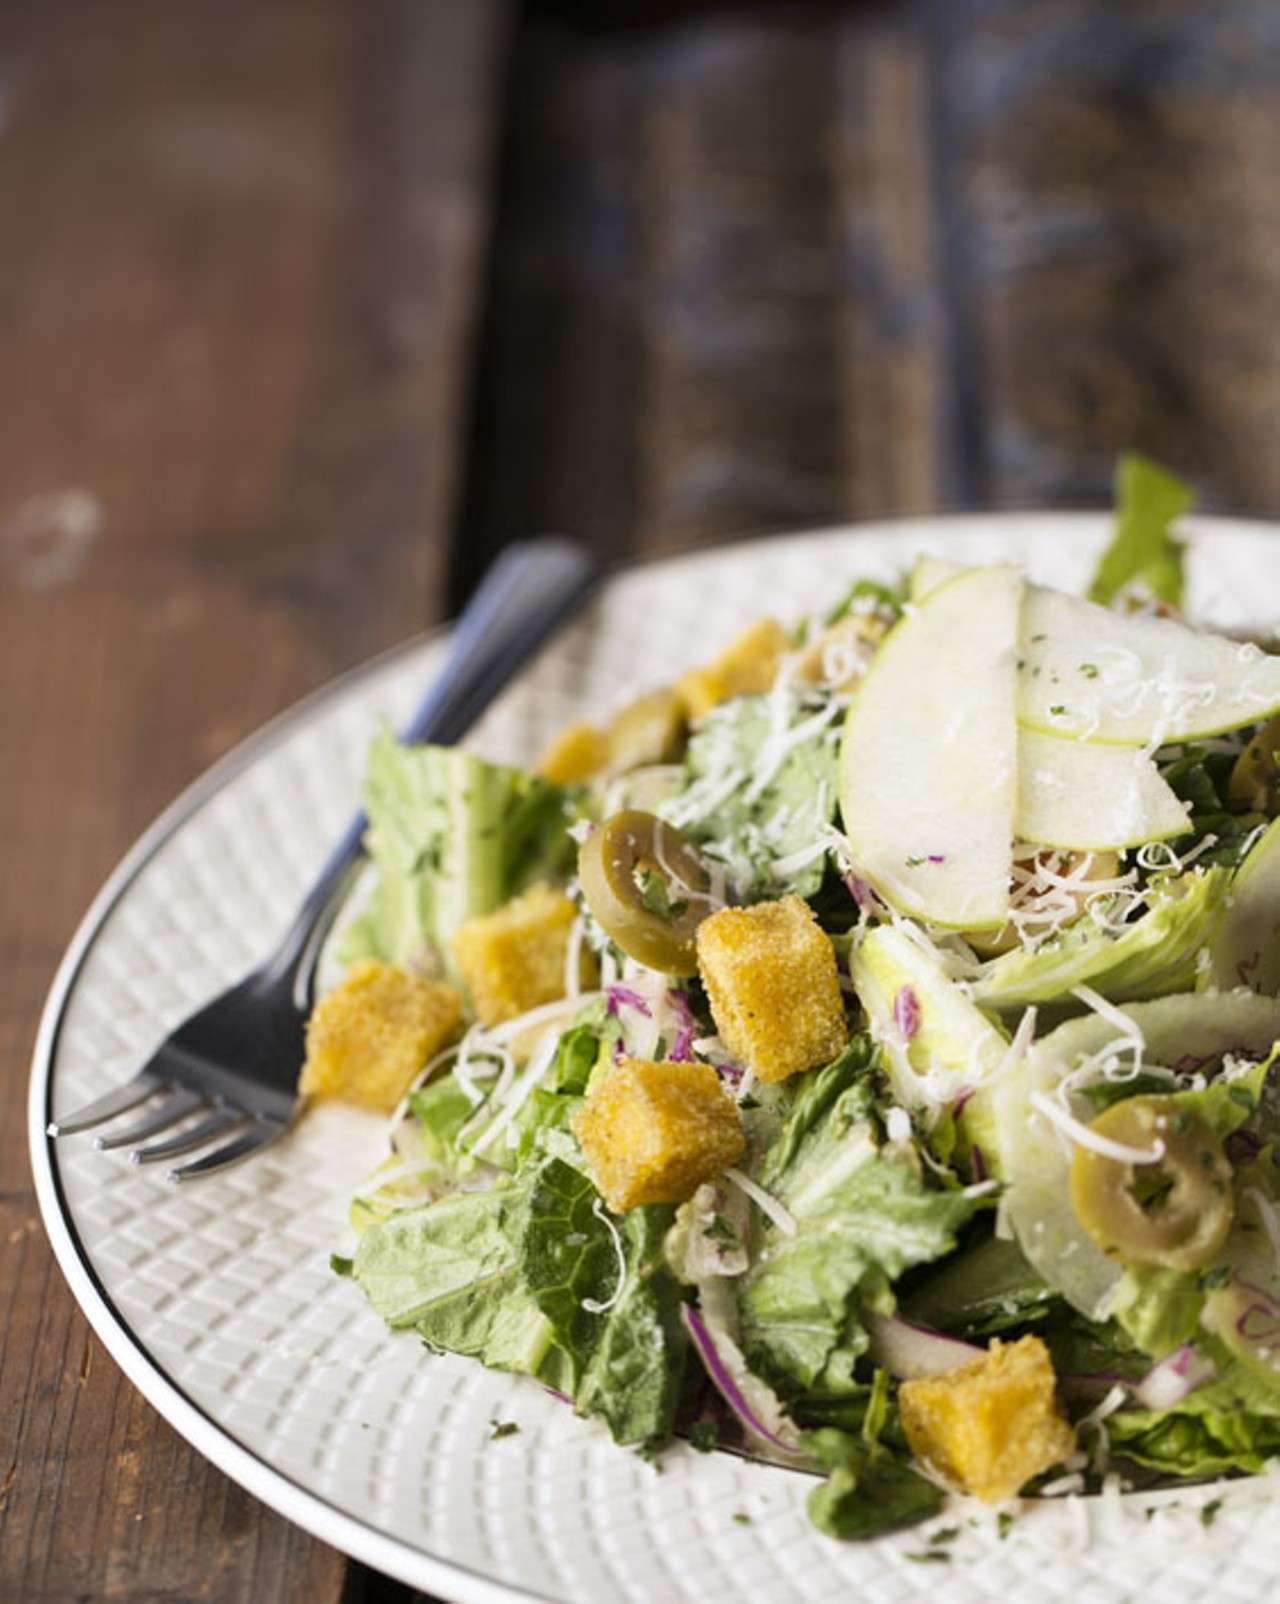 Blind Tiger's house salad, made with romaine, cabbage, fennel, olives and apples, complete with baked-polenta croutons and dill-cucumber vinaigrette.